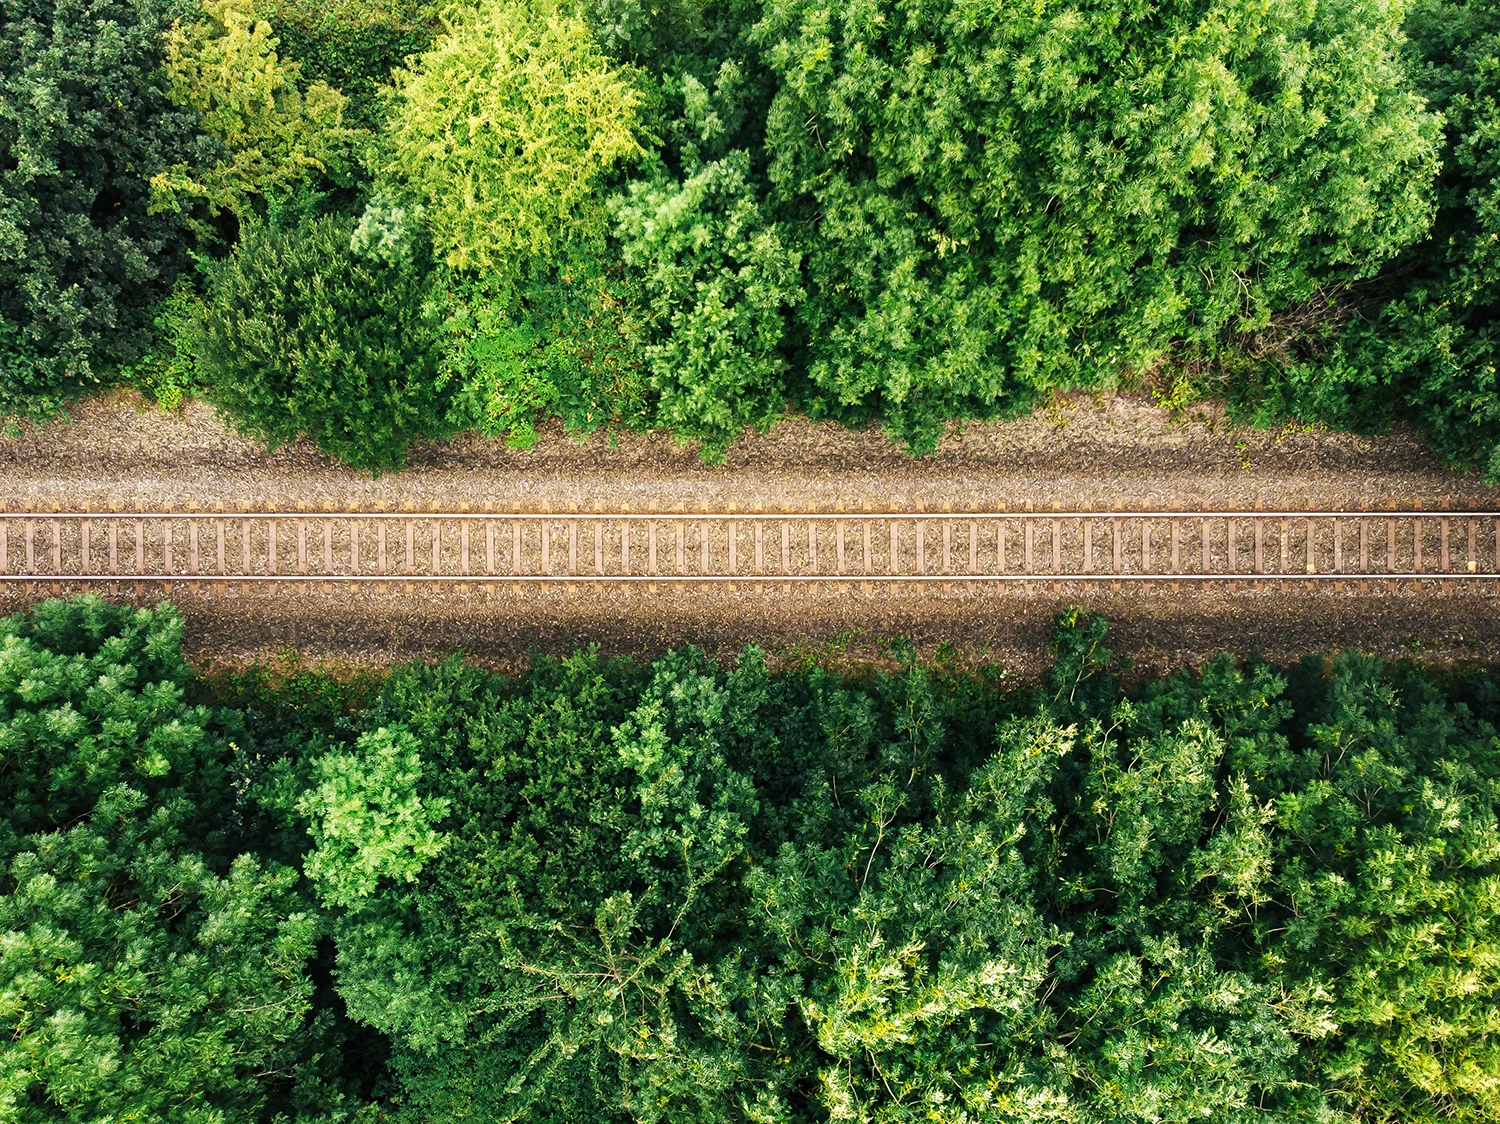 An aerial view of train tracks running horizontally across the image, with dense forest either side. 